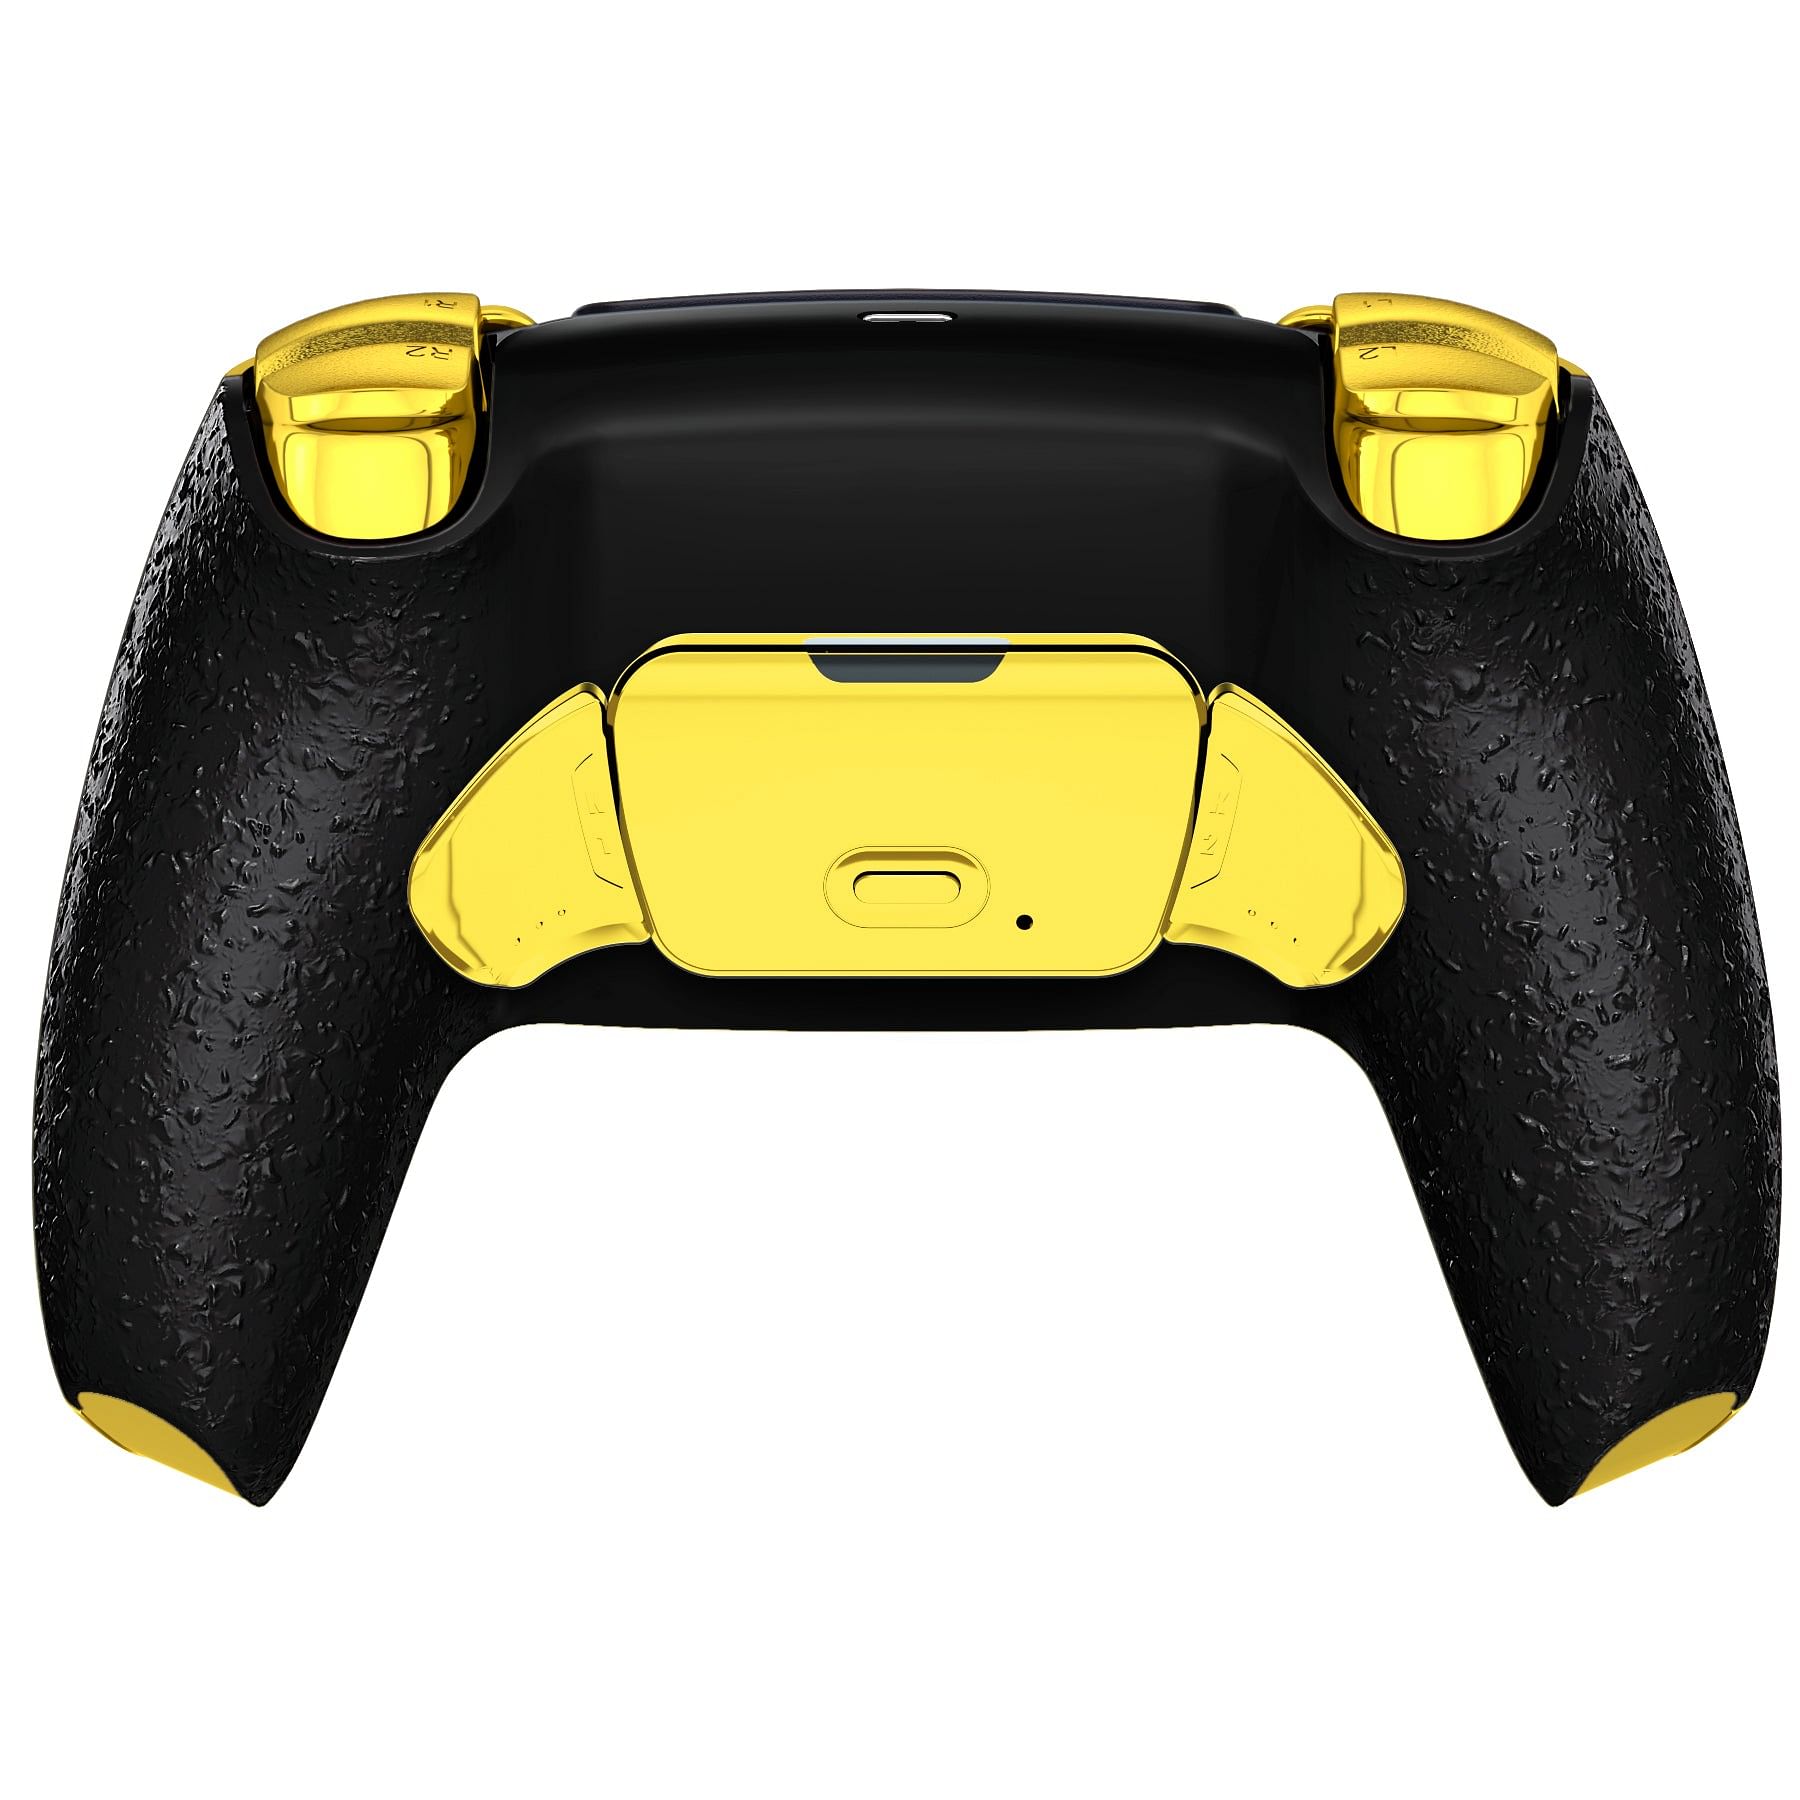 HEXGAMING RIVAL FPS eSport Custom Controller for PS5, PC - Black Gold 